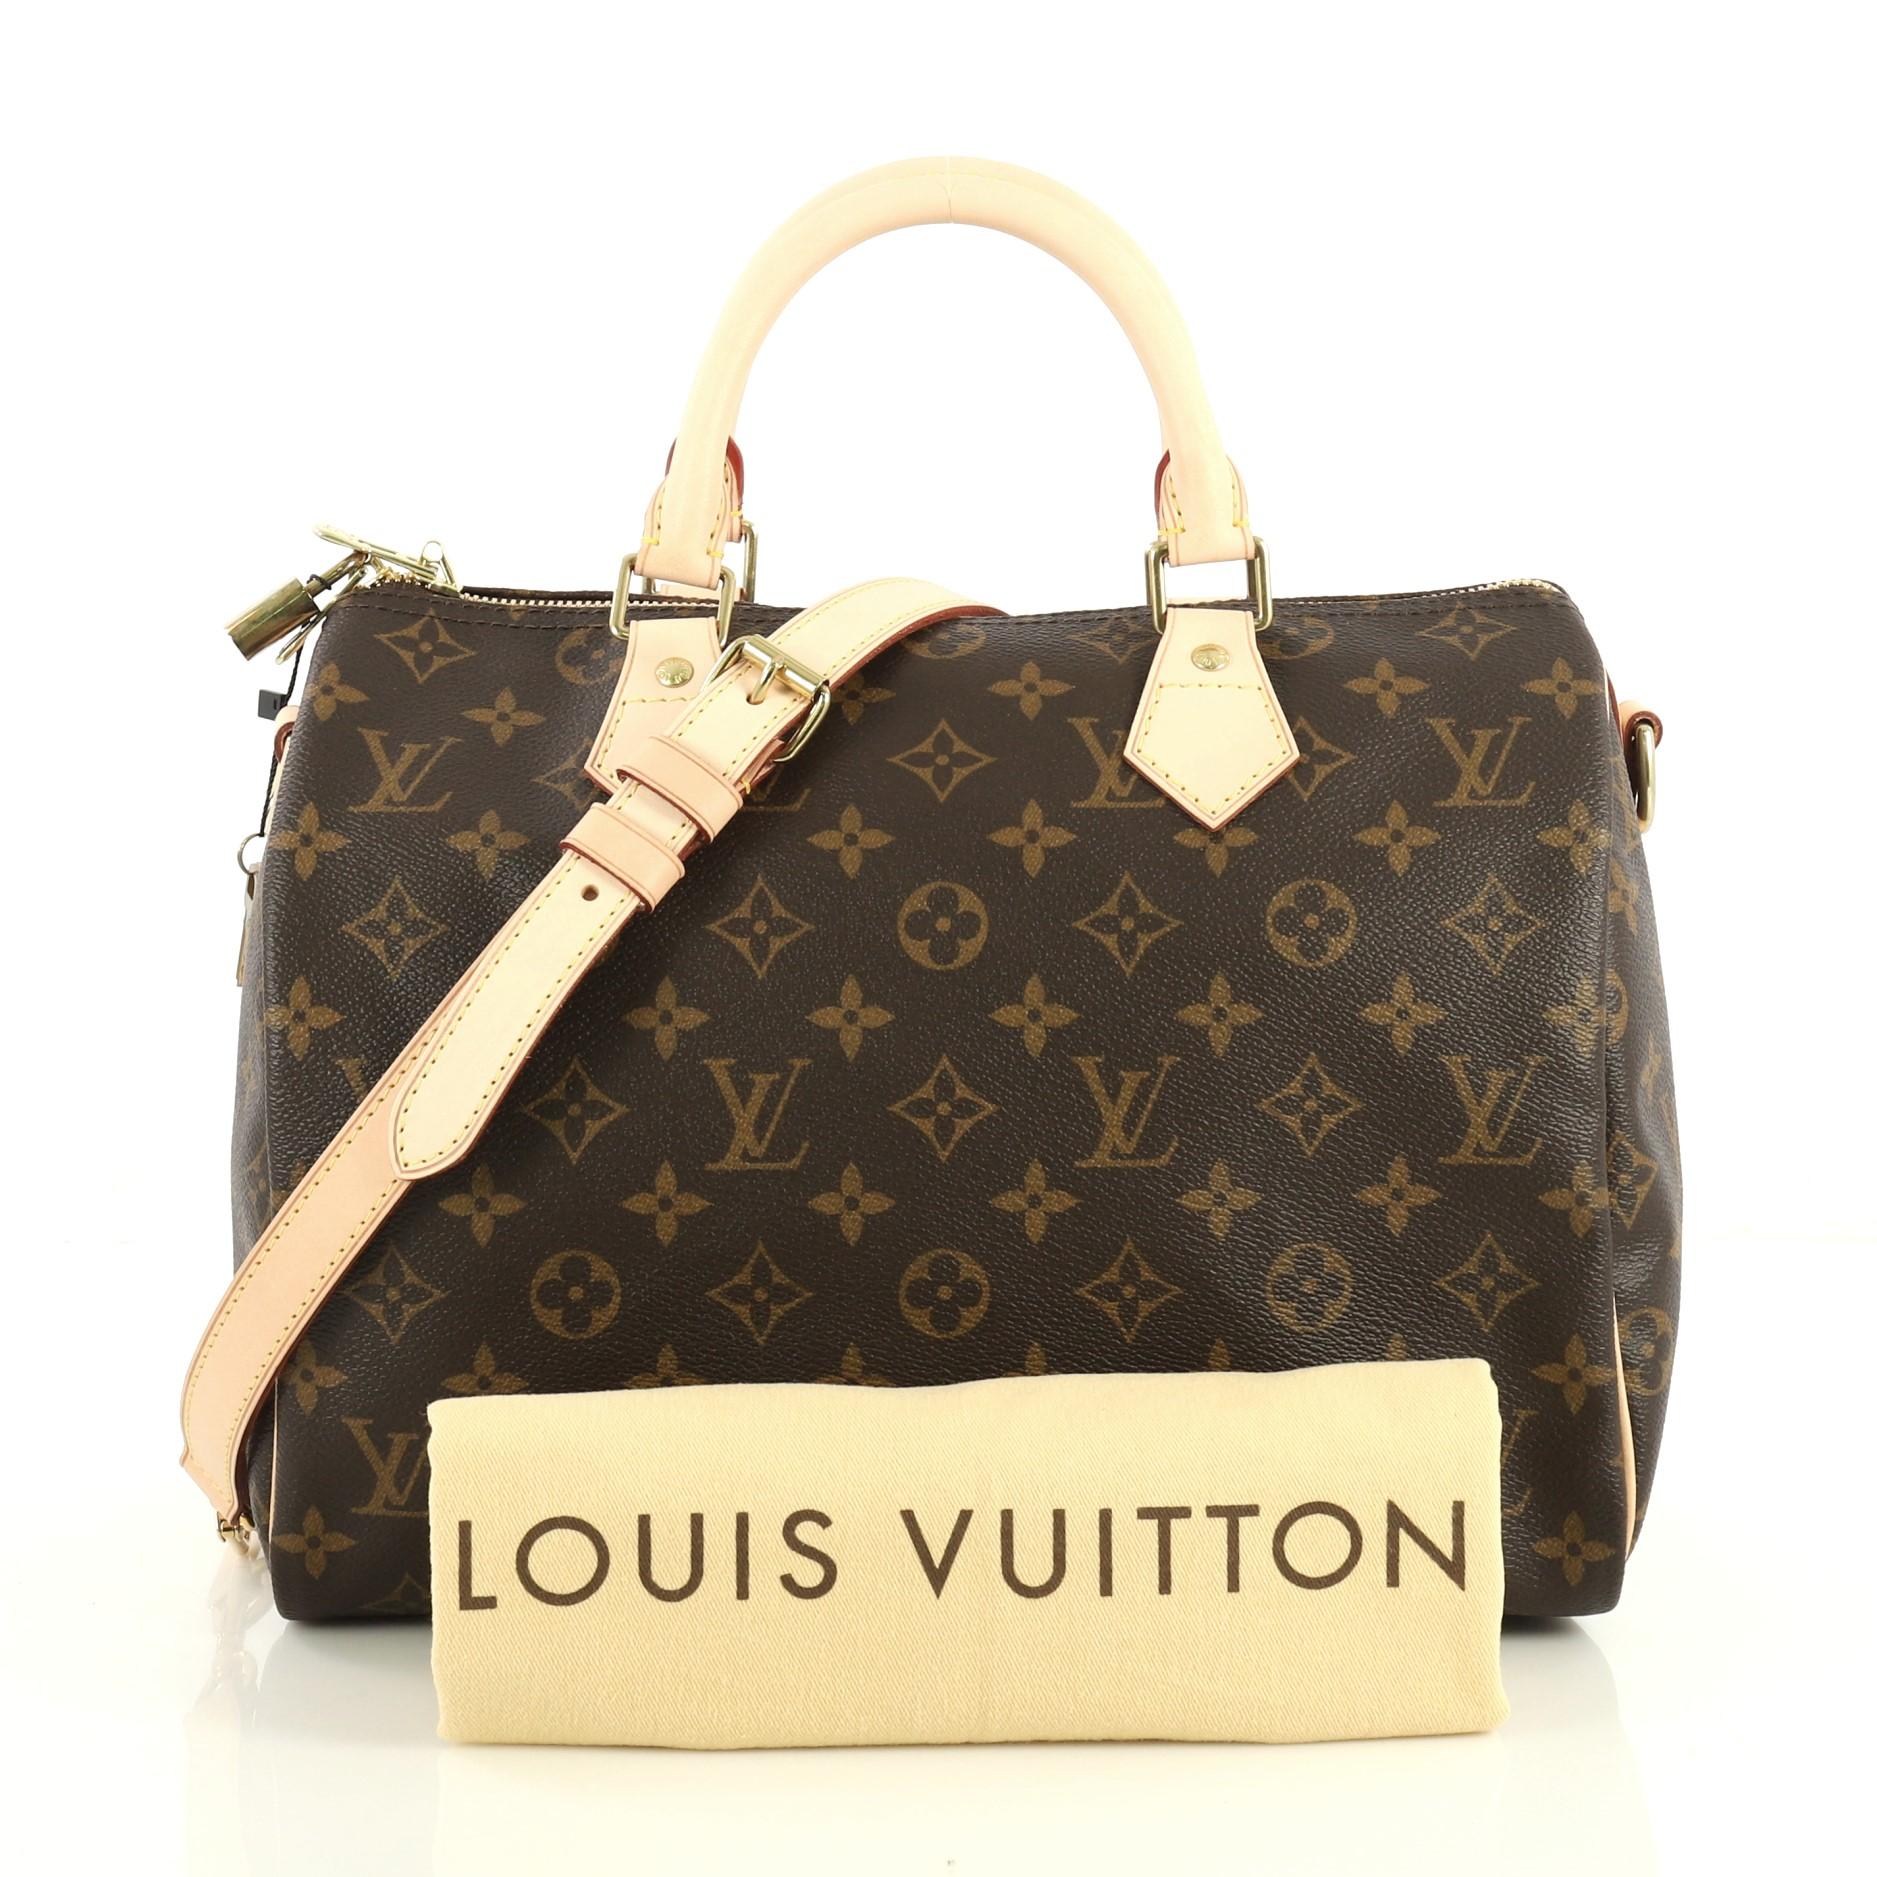 This Louis Vuitton Speedy Bandouliere Bag Monogram Canvas 30, crafted from brown monogram coated canvas, features dual rolled handles and gold-tone hardware. Its zip closure opens to a brown fabric interior with side slip pocket. Authenticity code